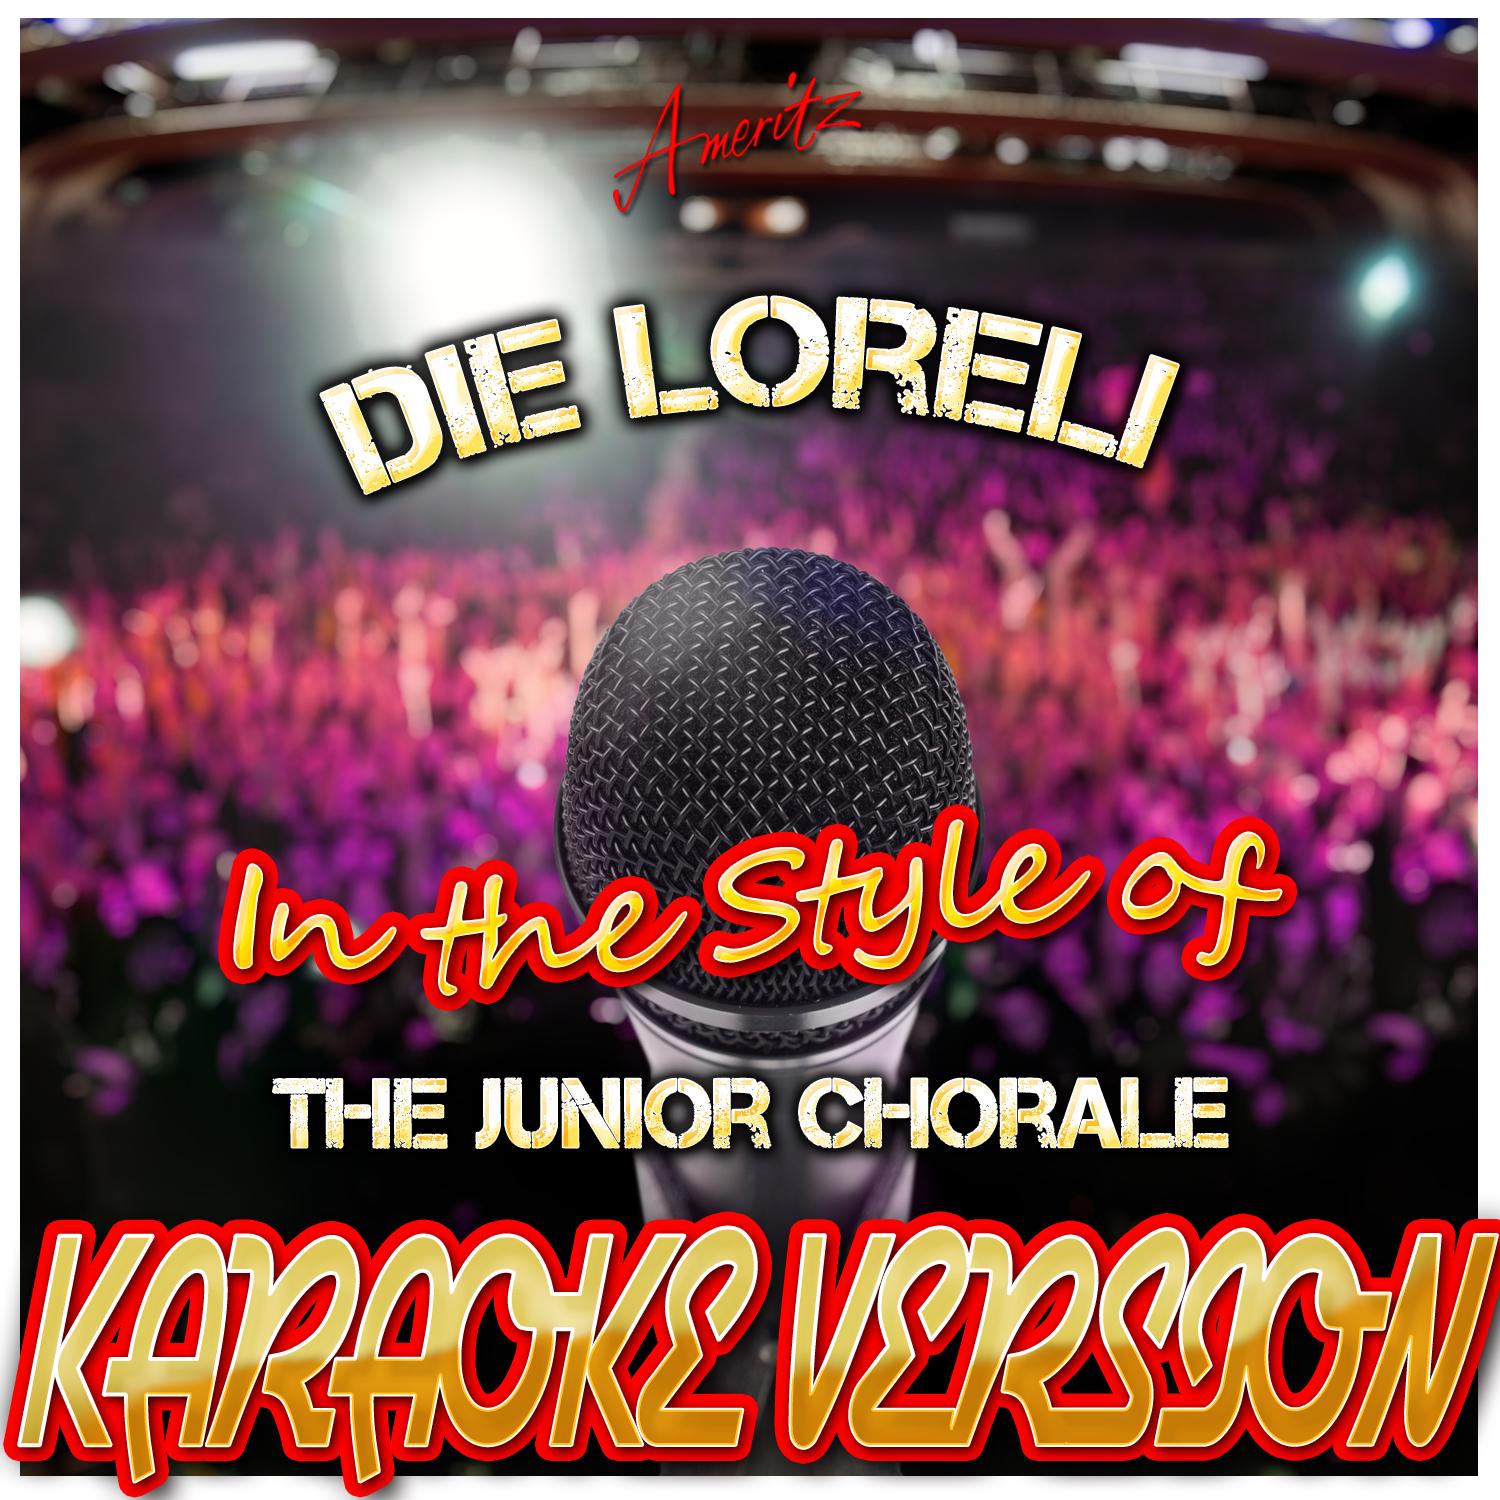 Die Loreli (In the Style of Voices of the Junior Chorale) [Karaoke Version]